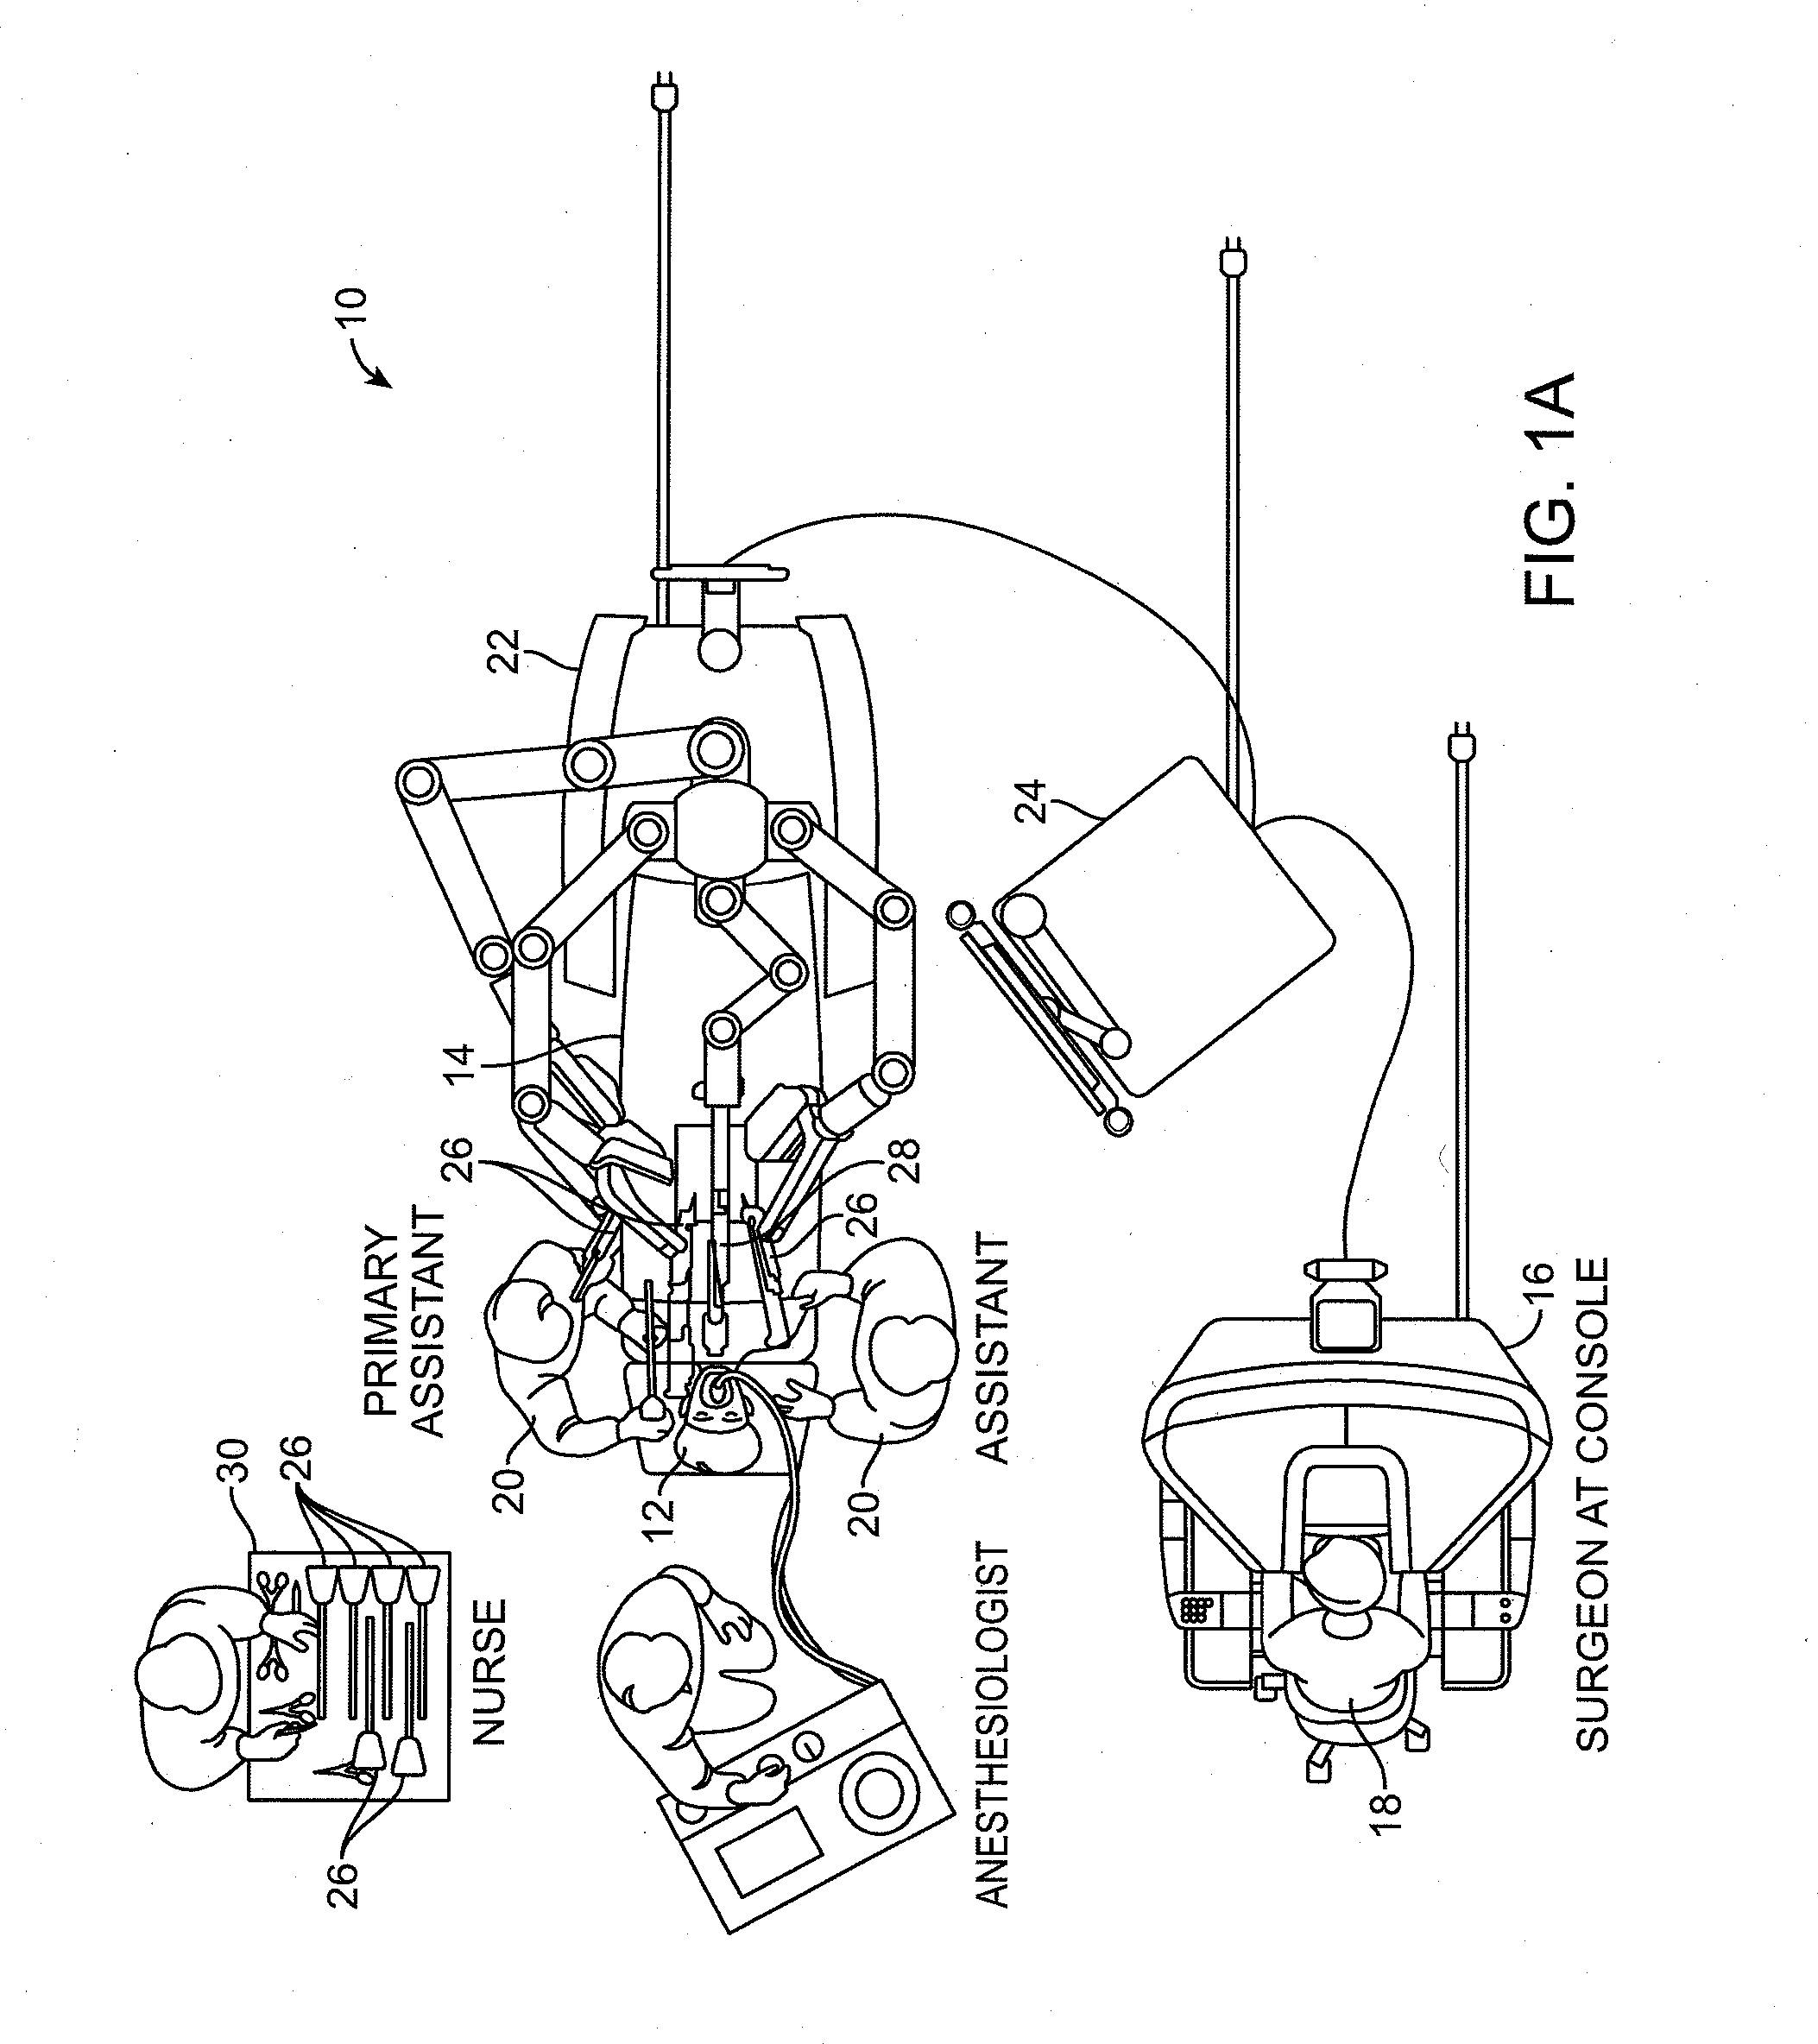 Systems and methods for commanded reconfiguration of a surgical manipulator using the null-space